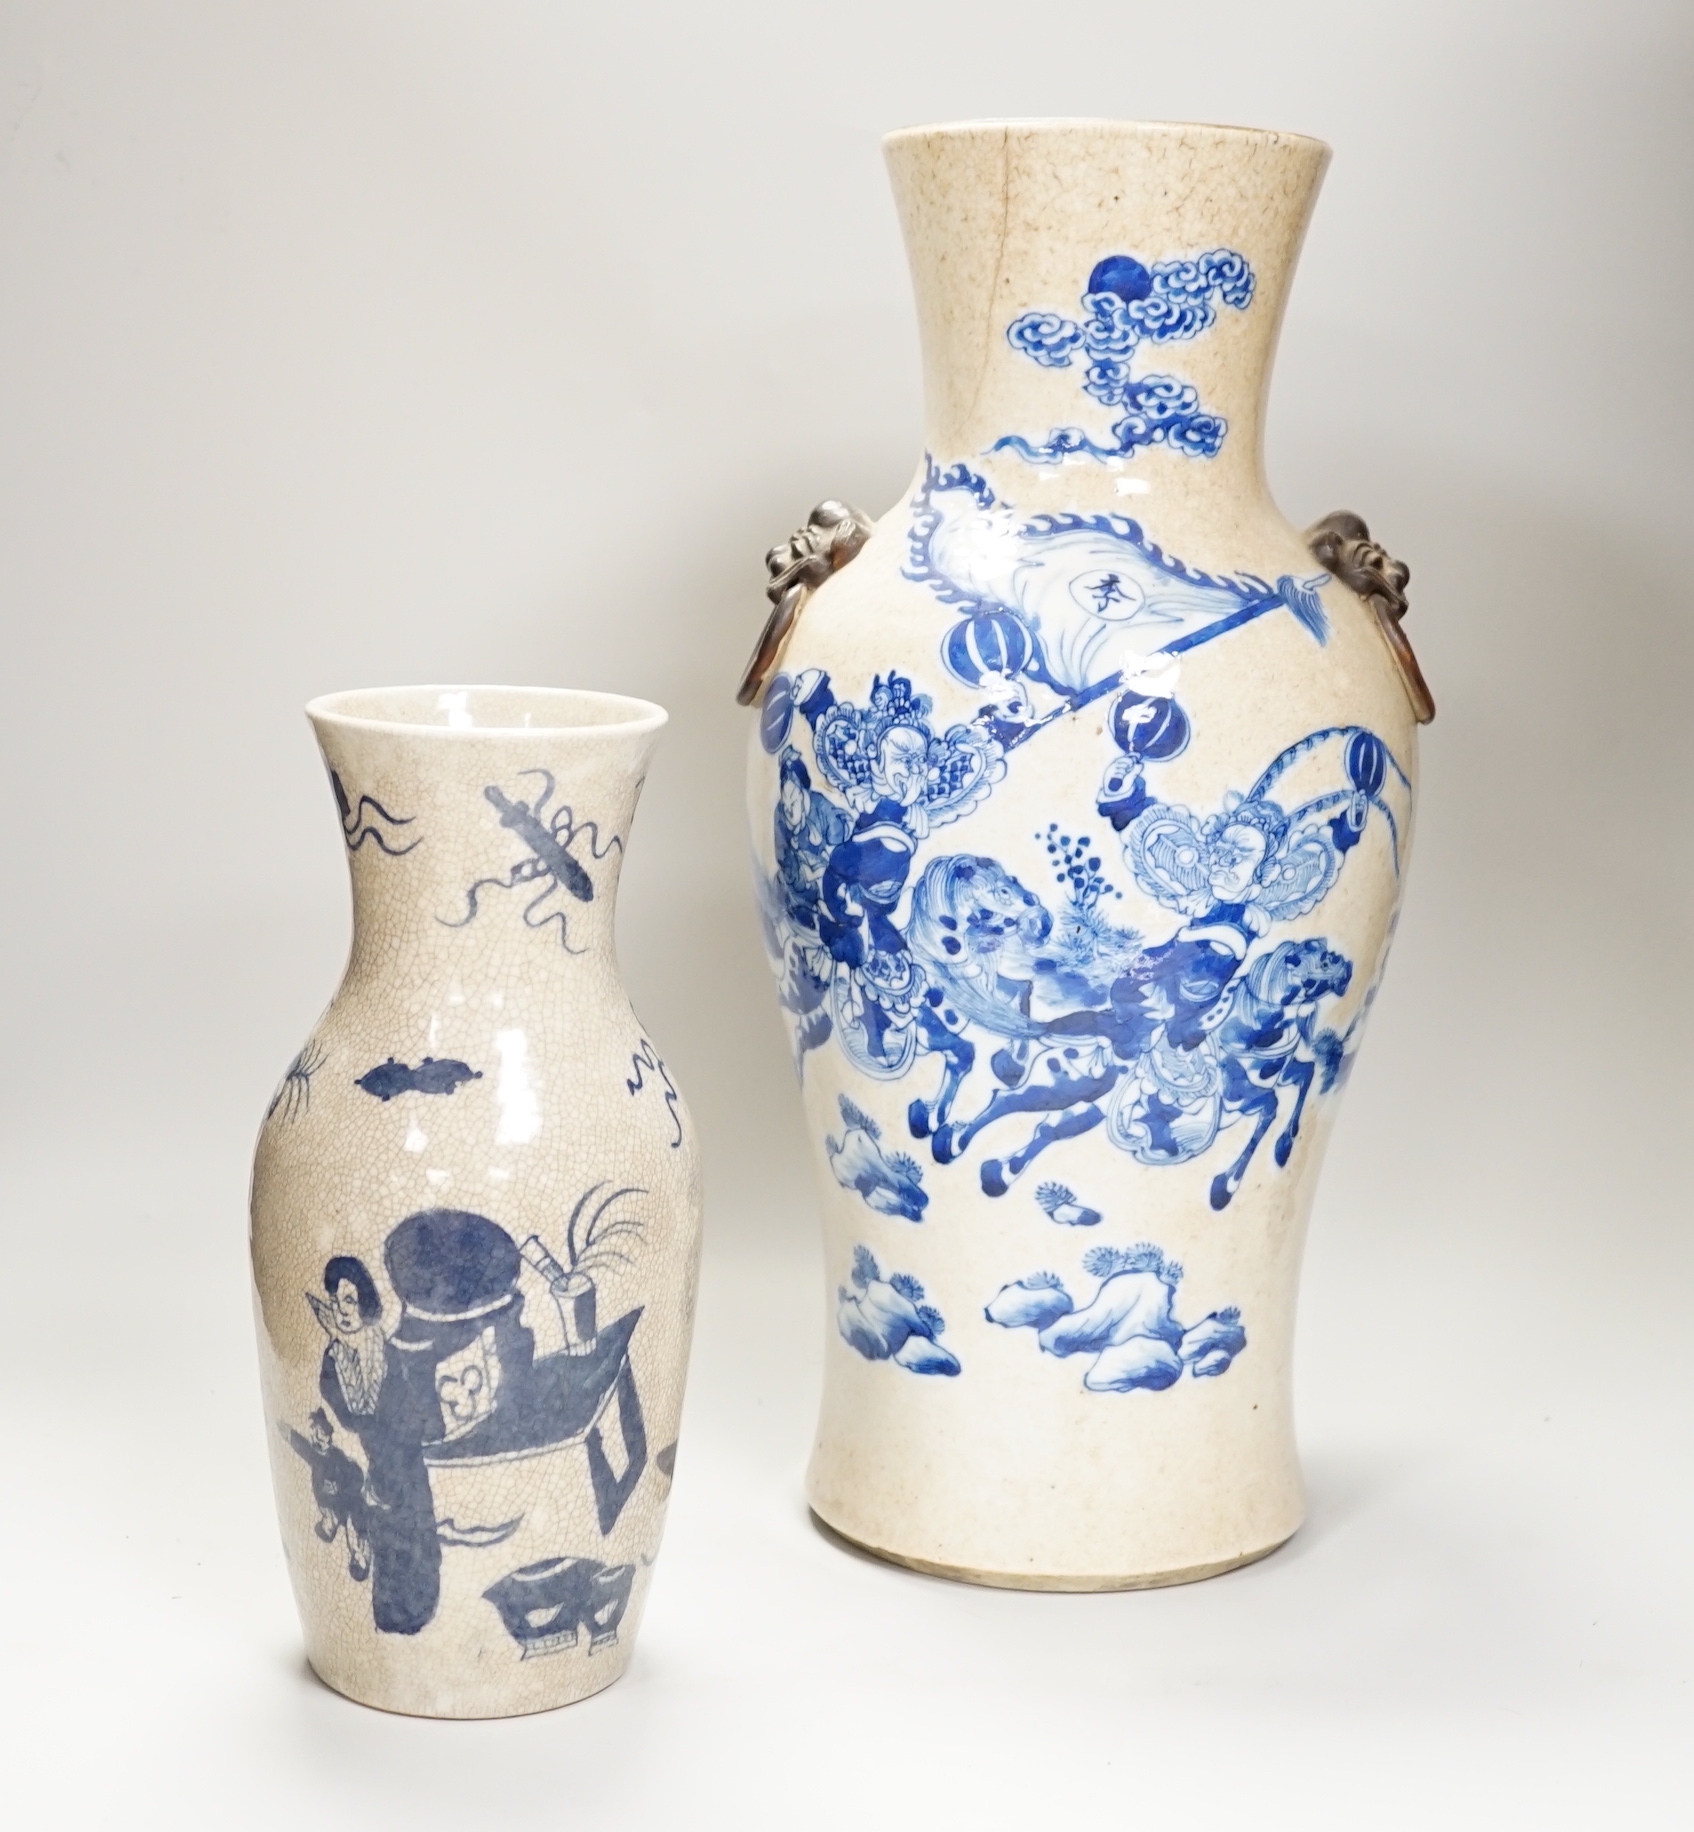 An early 20th century Chinese crackle glaze blue and white vase, 44cm and a later smaller vase